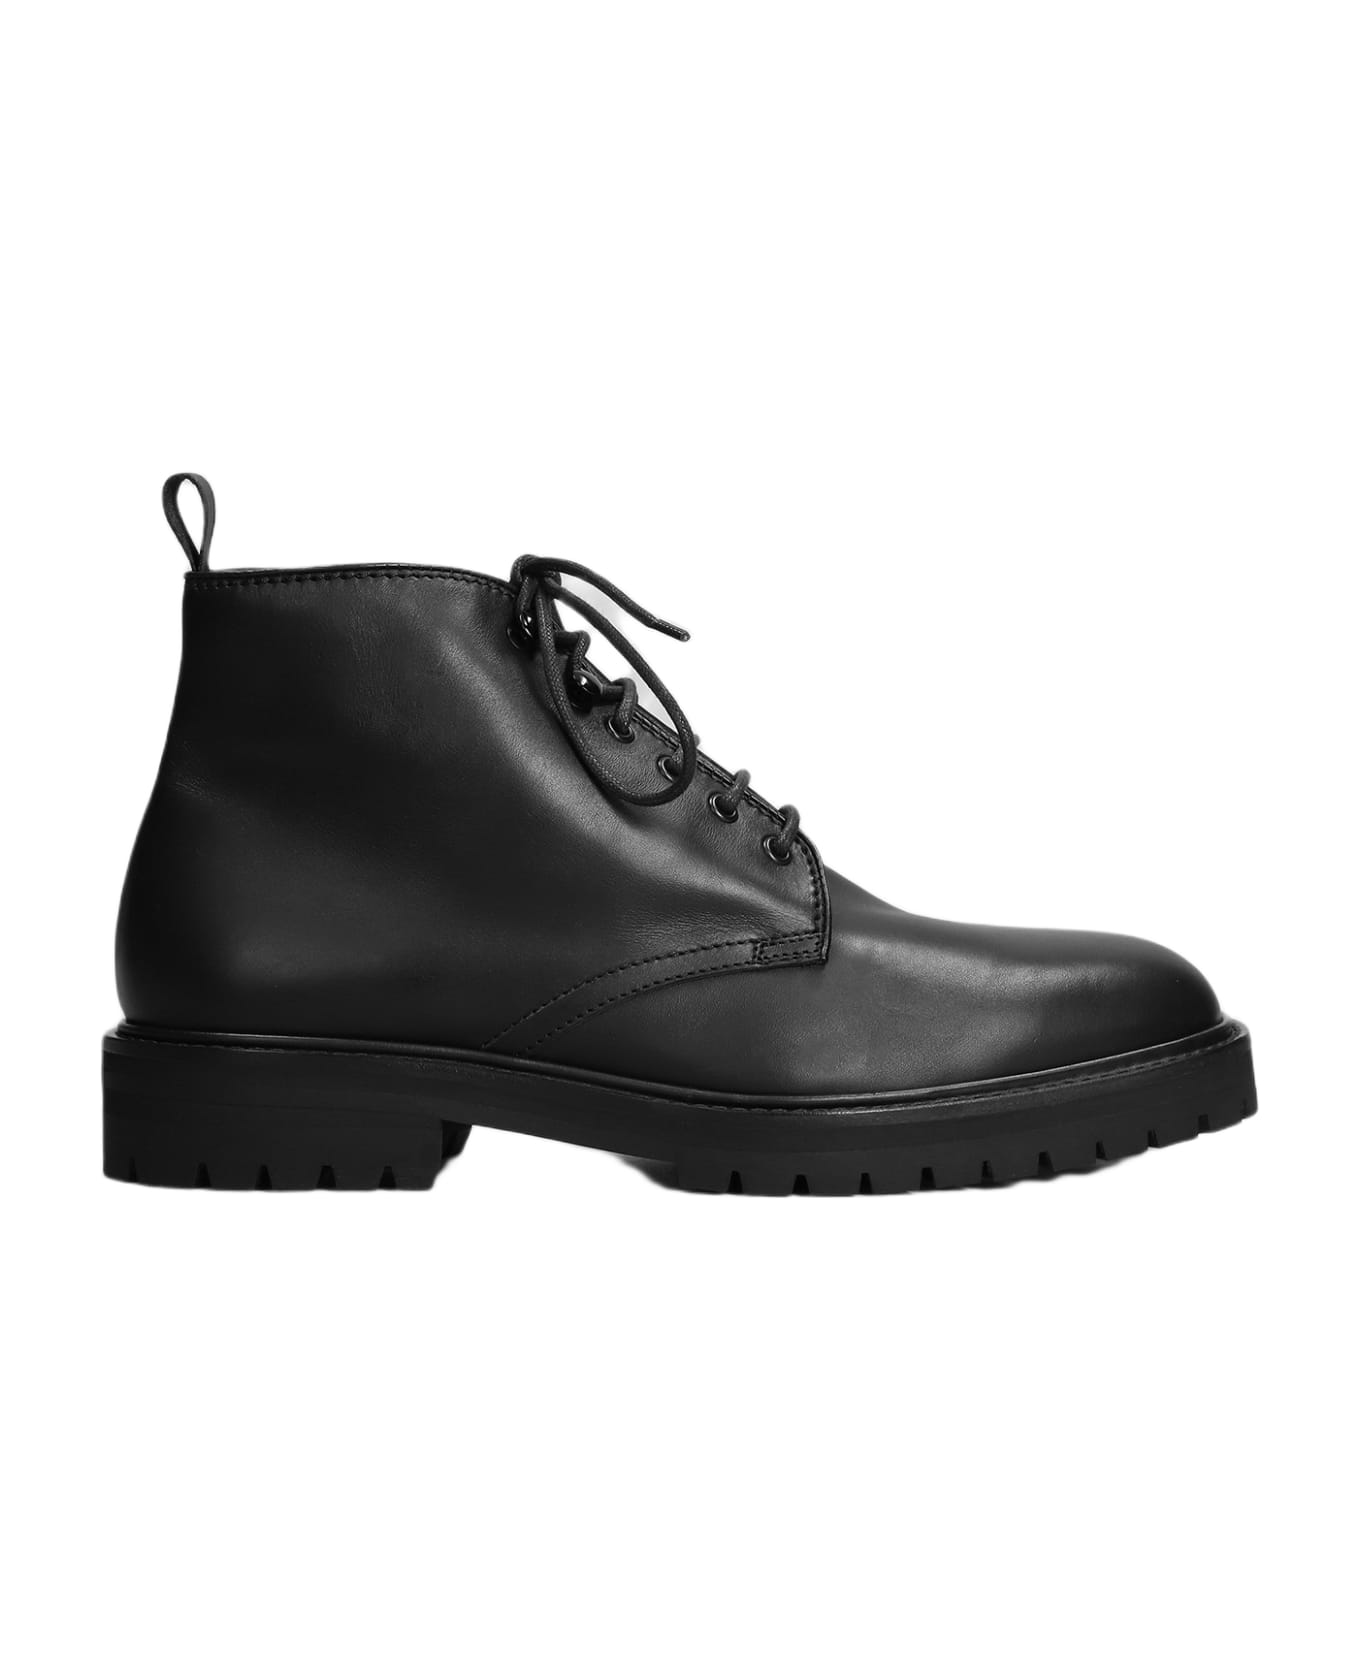 Officine Creative Joss 001 Ankle Boots In Black Leather - black